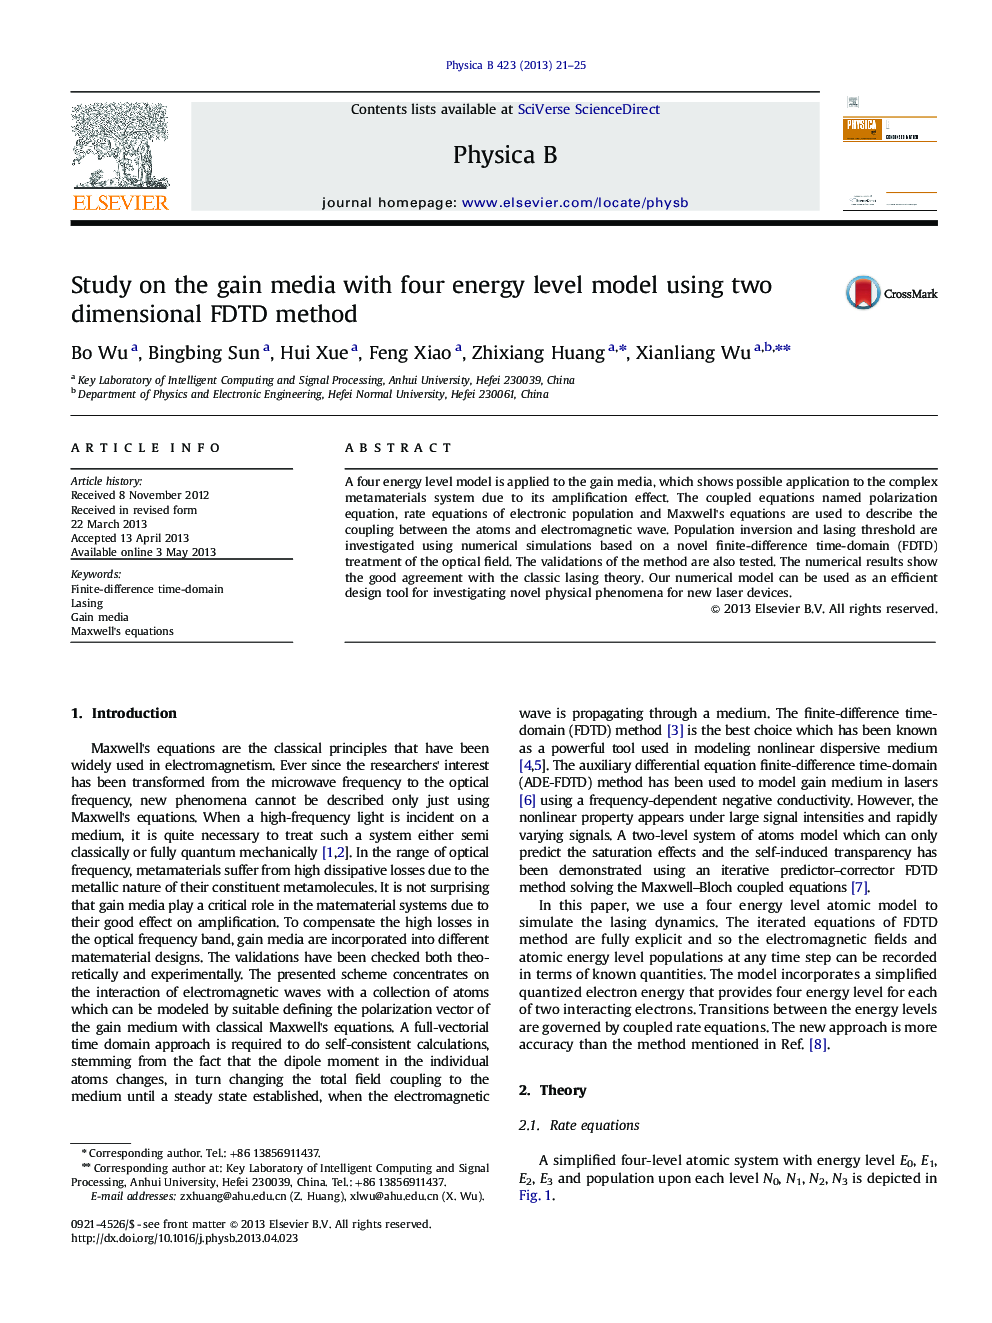 Study on the gain media with four energy level model using two dimensional FDTD method